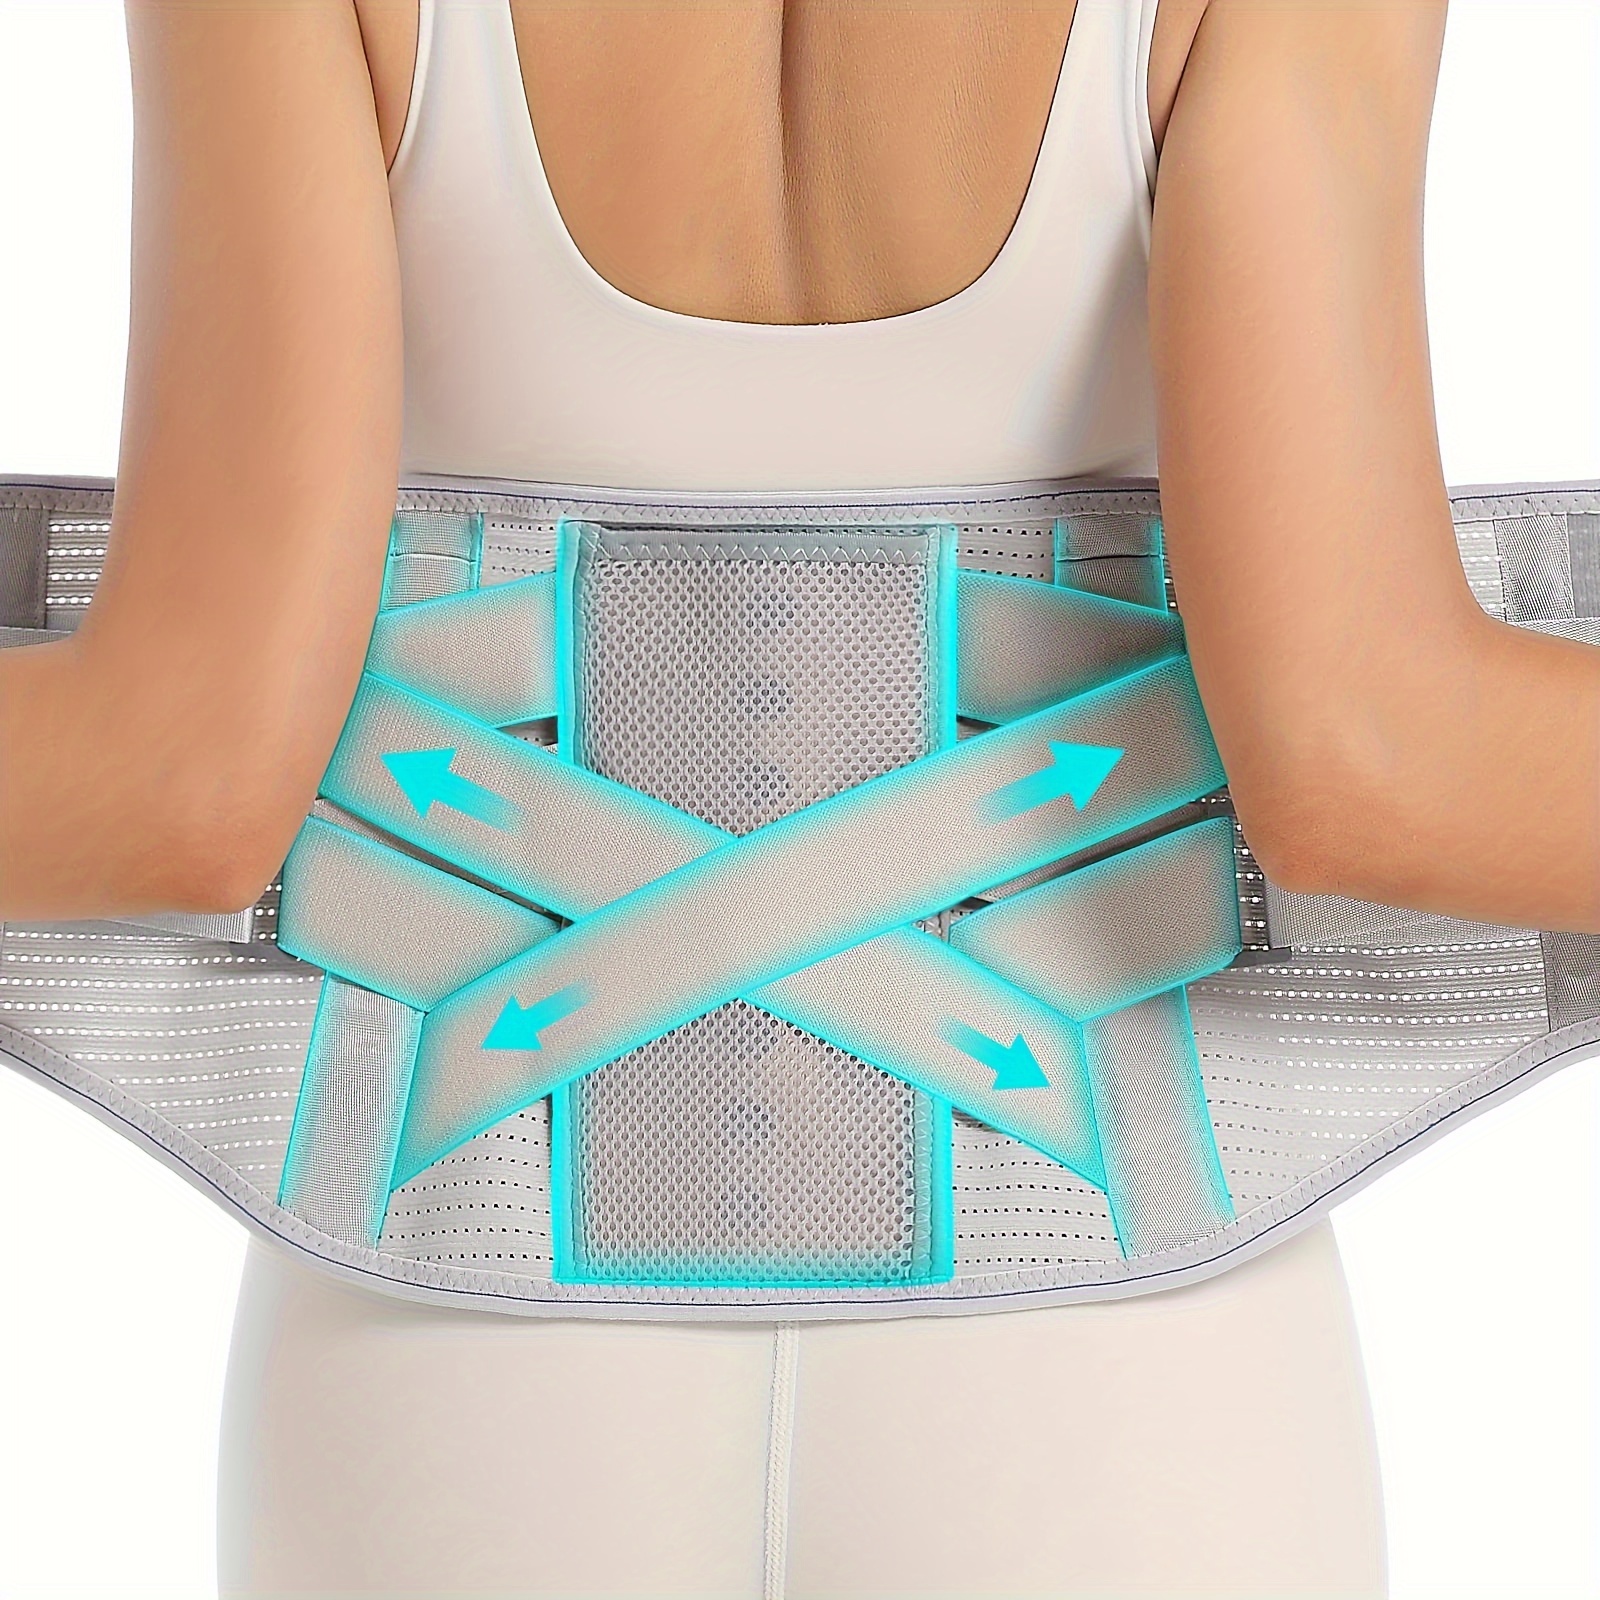 NEENCA Back Support Brace, Adjustable Lumbar Support for Pain